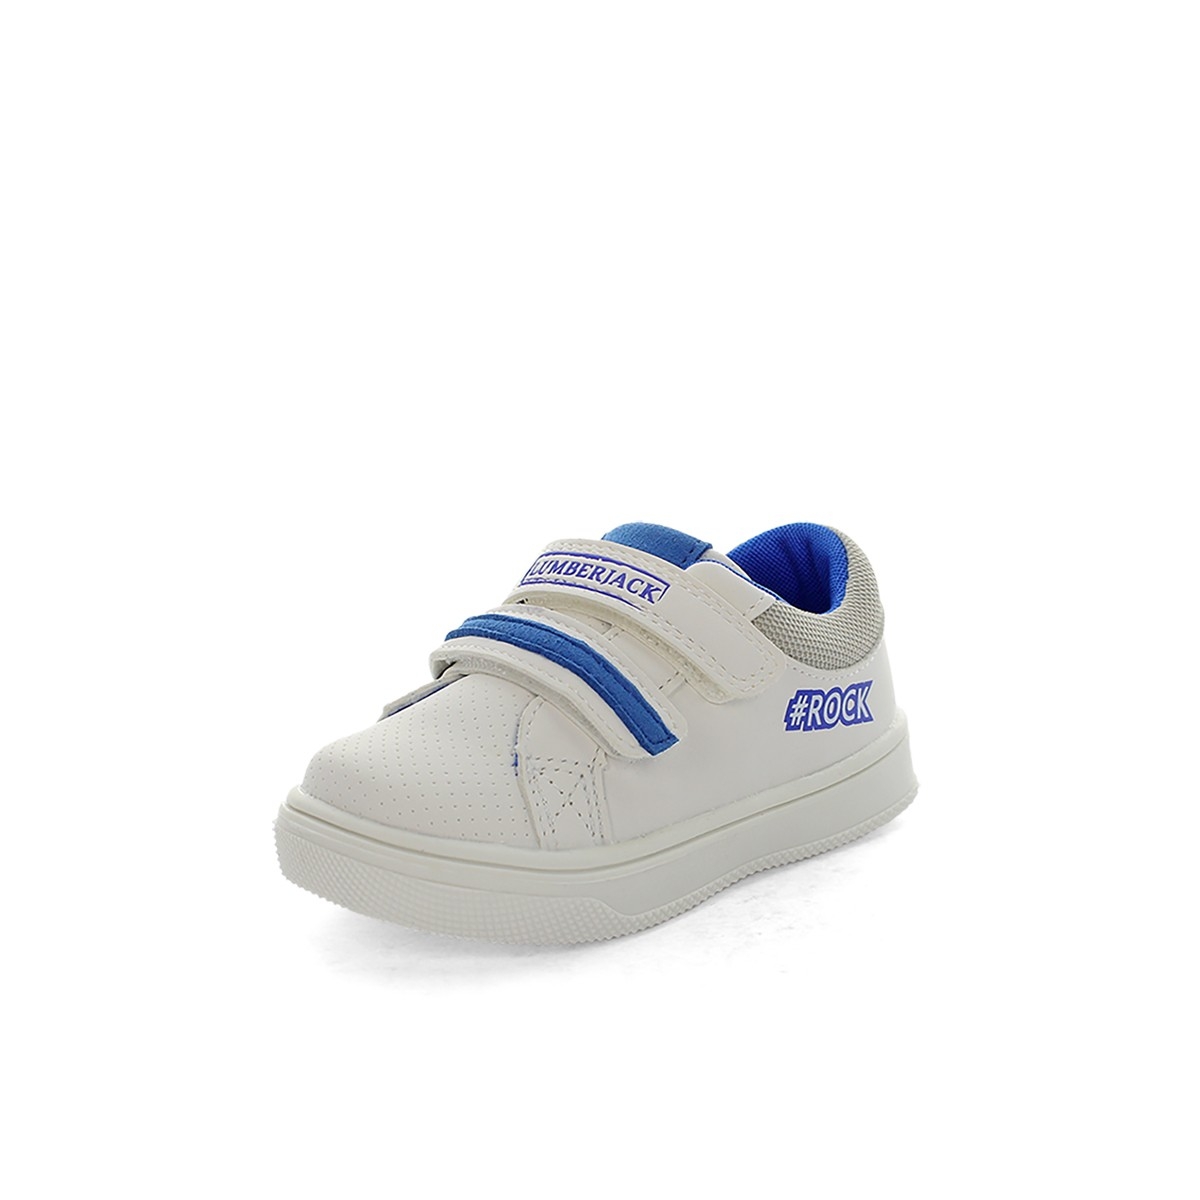 MOBY Sneakers Bambino